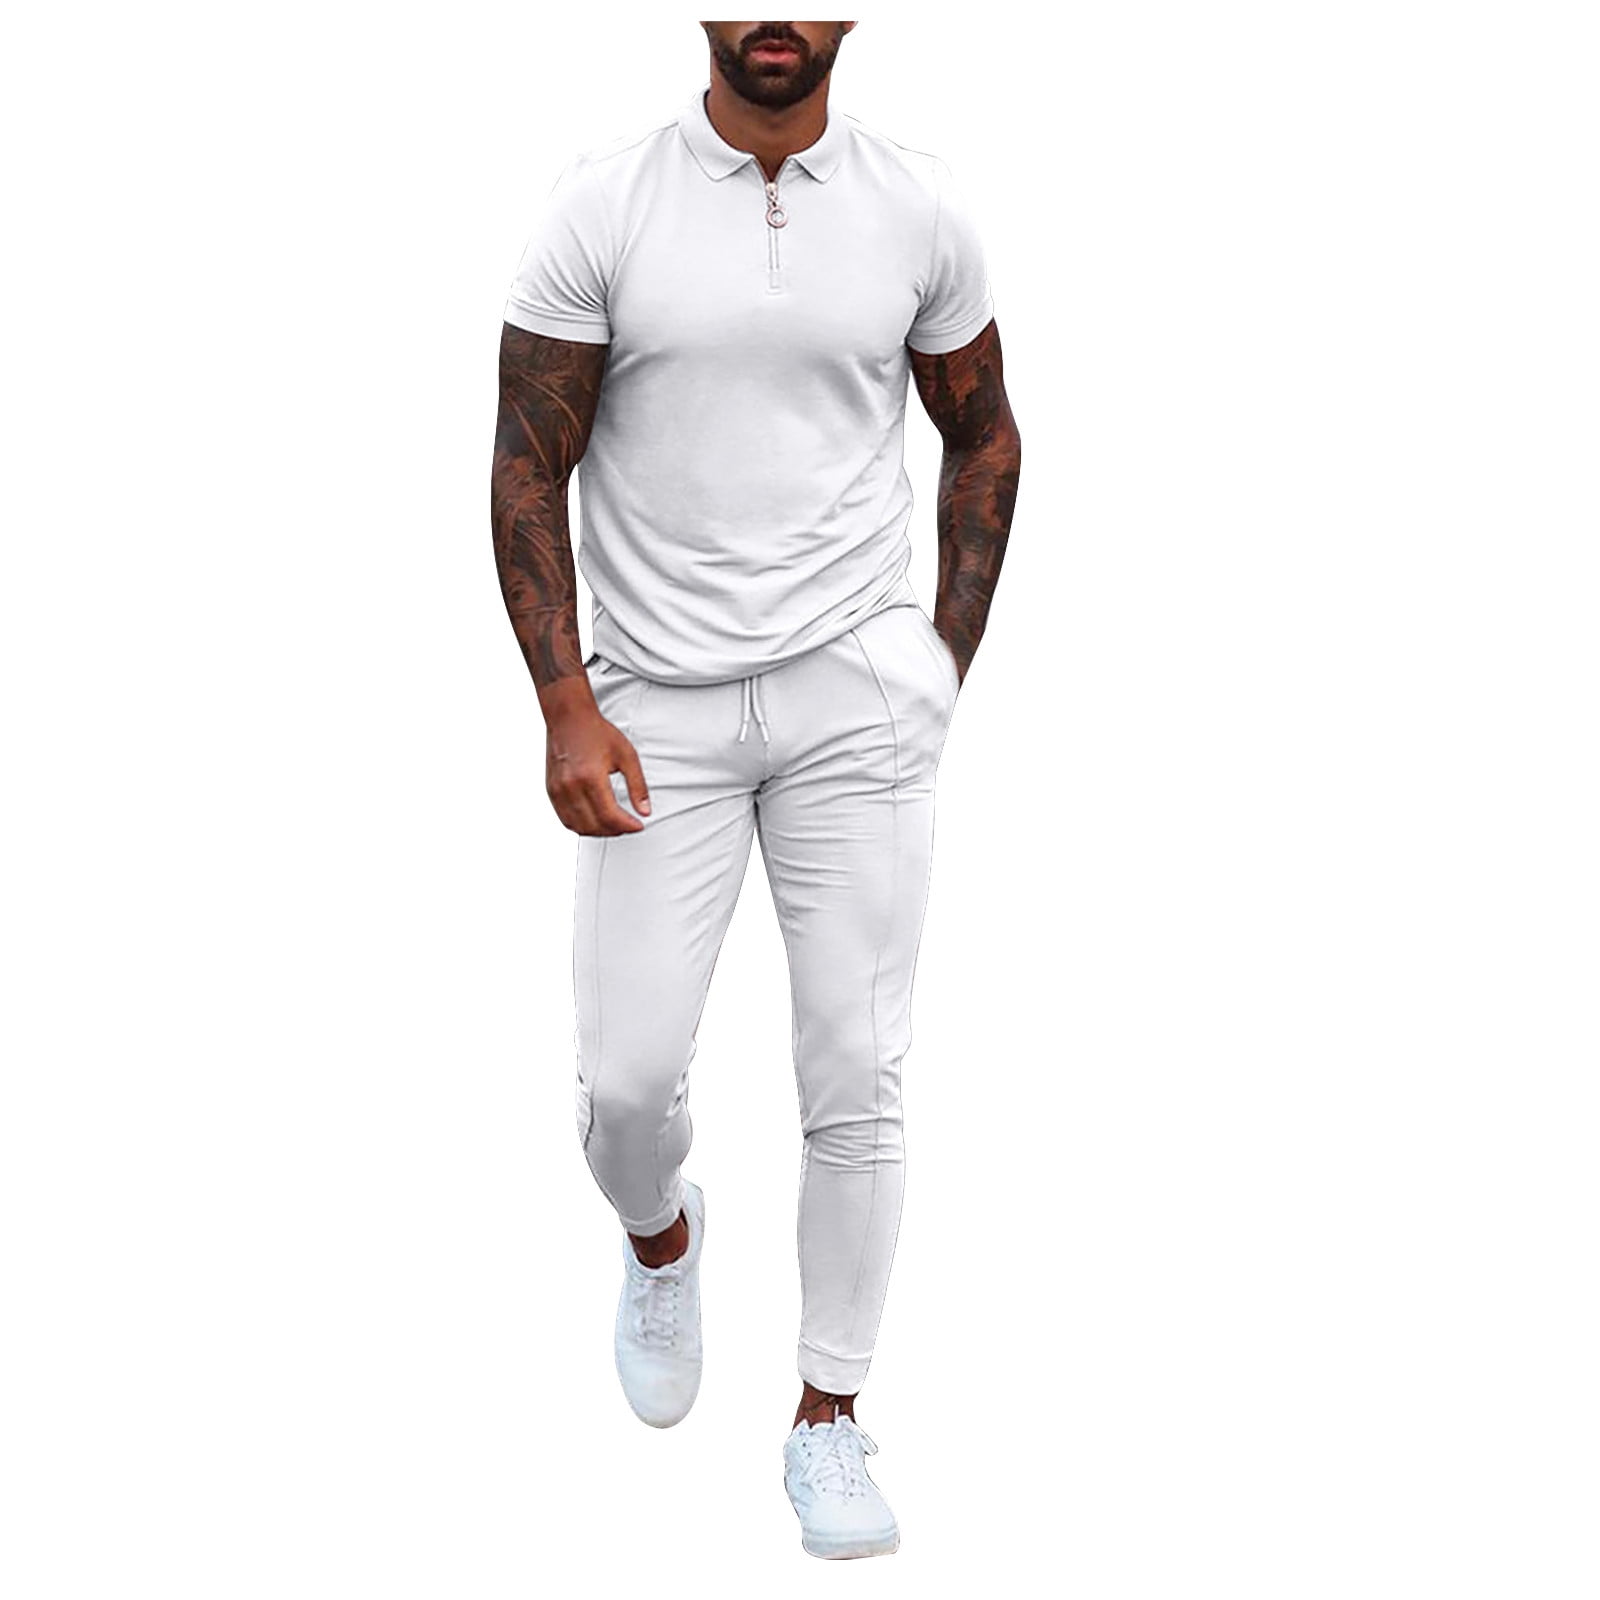 REORIAFEE Mens Sport Set Summer Outfit 2 Piece Set Stylish Casual